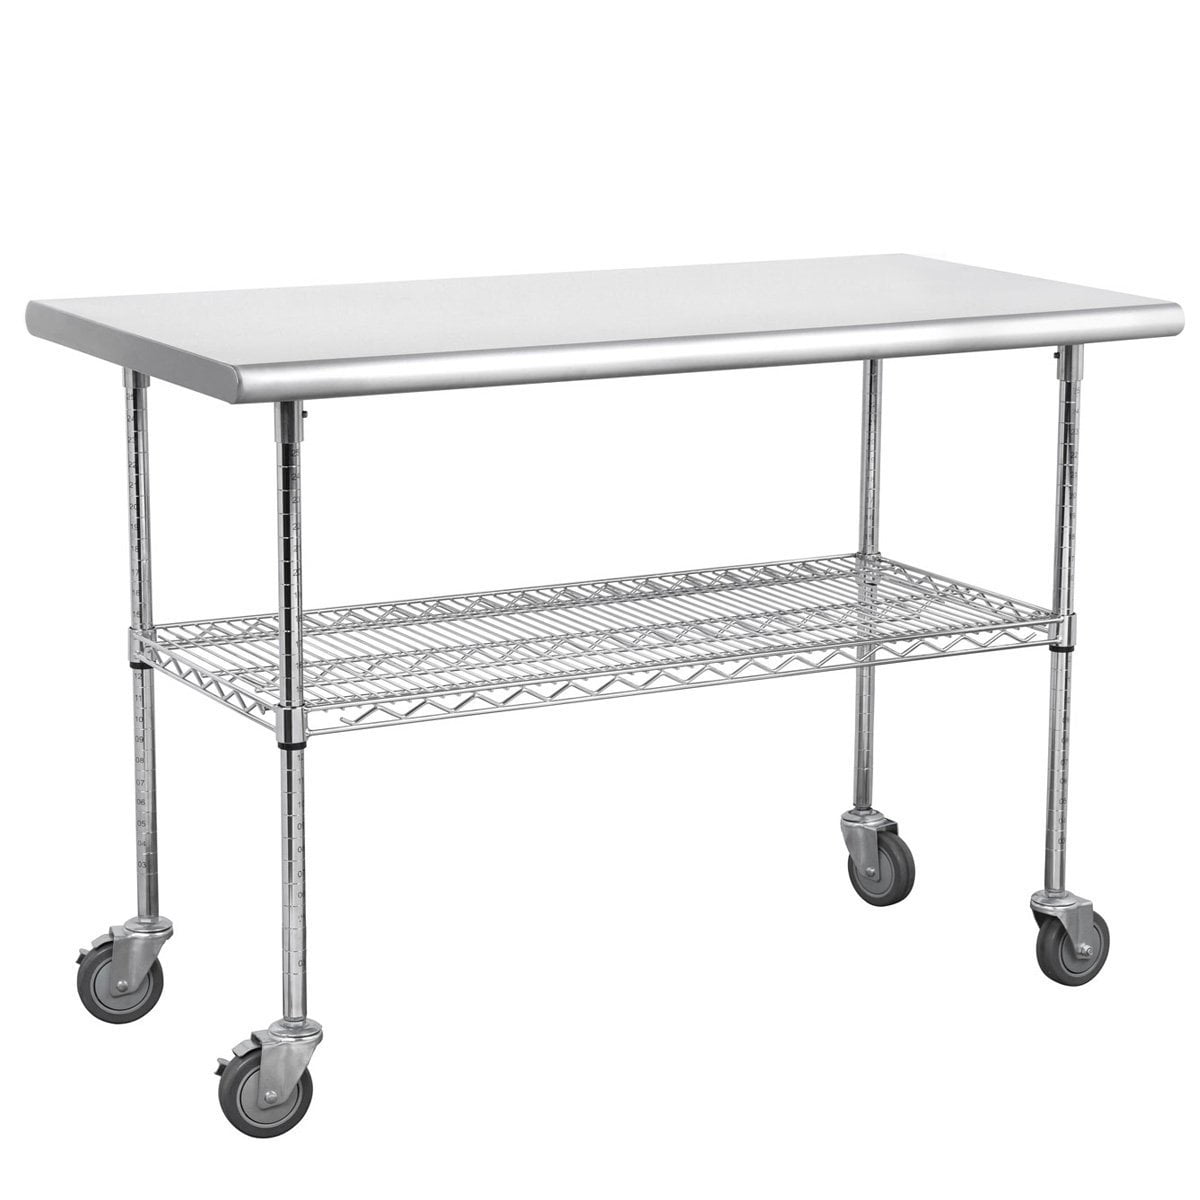 Outdoor Stainless Steel Table With Wheels